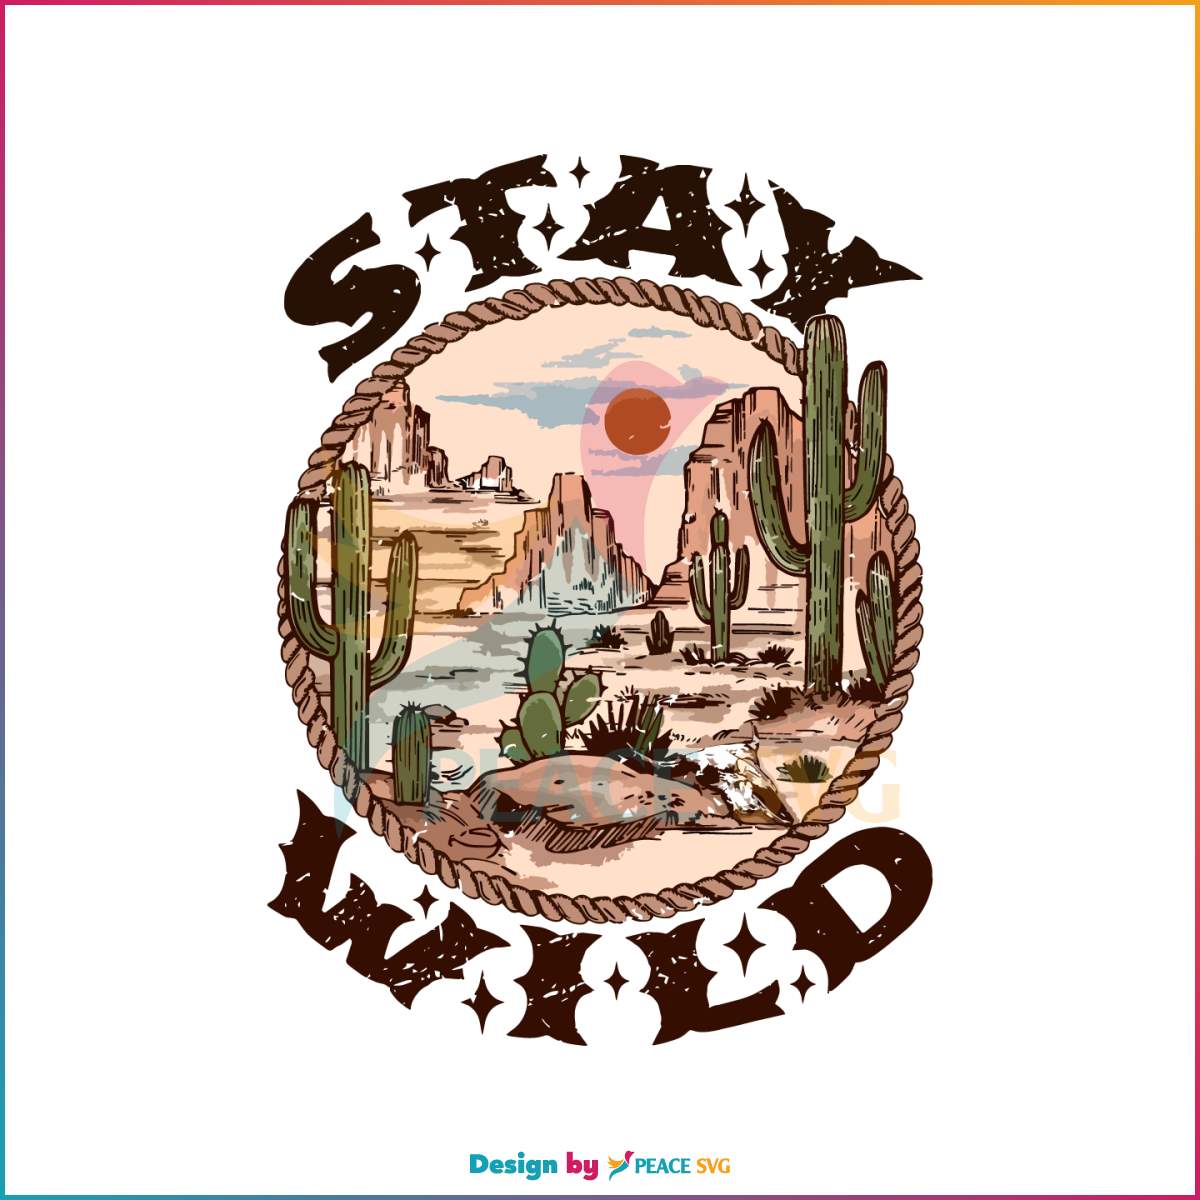 western-stay-wild-svg-wild-life-desert-and-cactus-svg-file